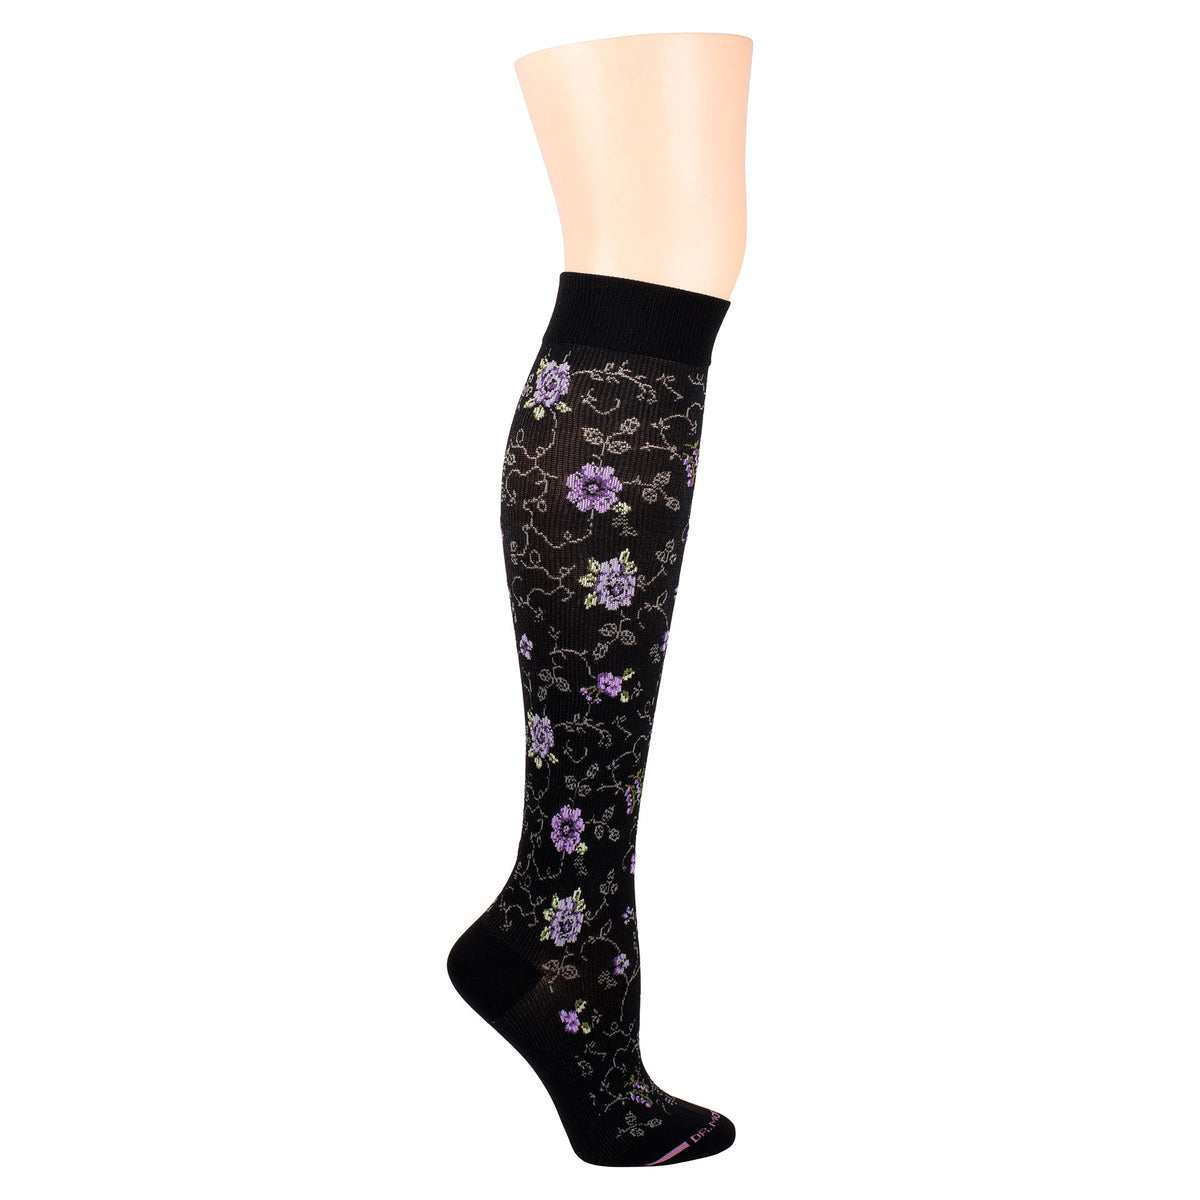 Knee-High Compression Socks For Women | Dr. Motion | Pretty Floral